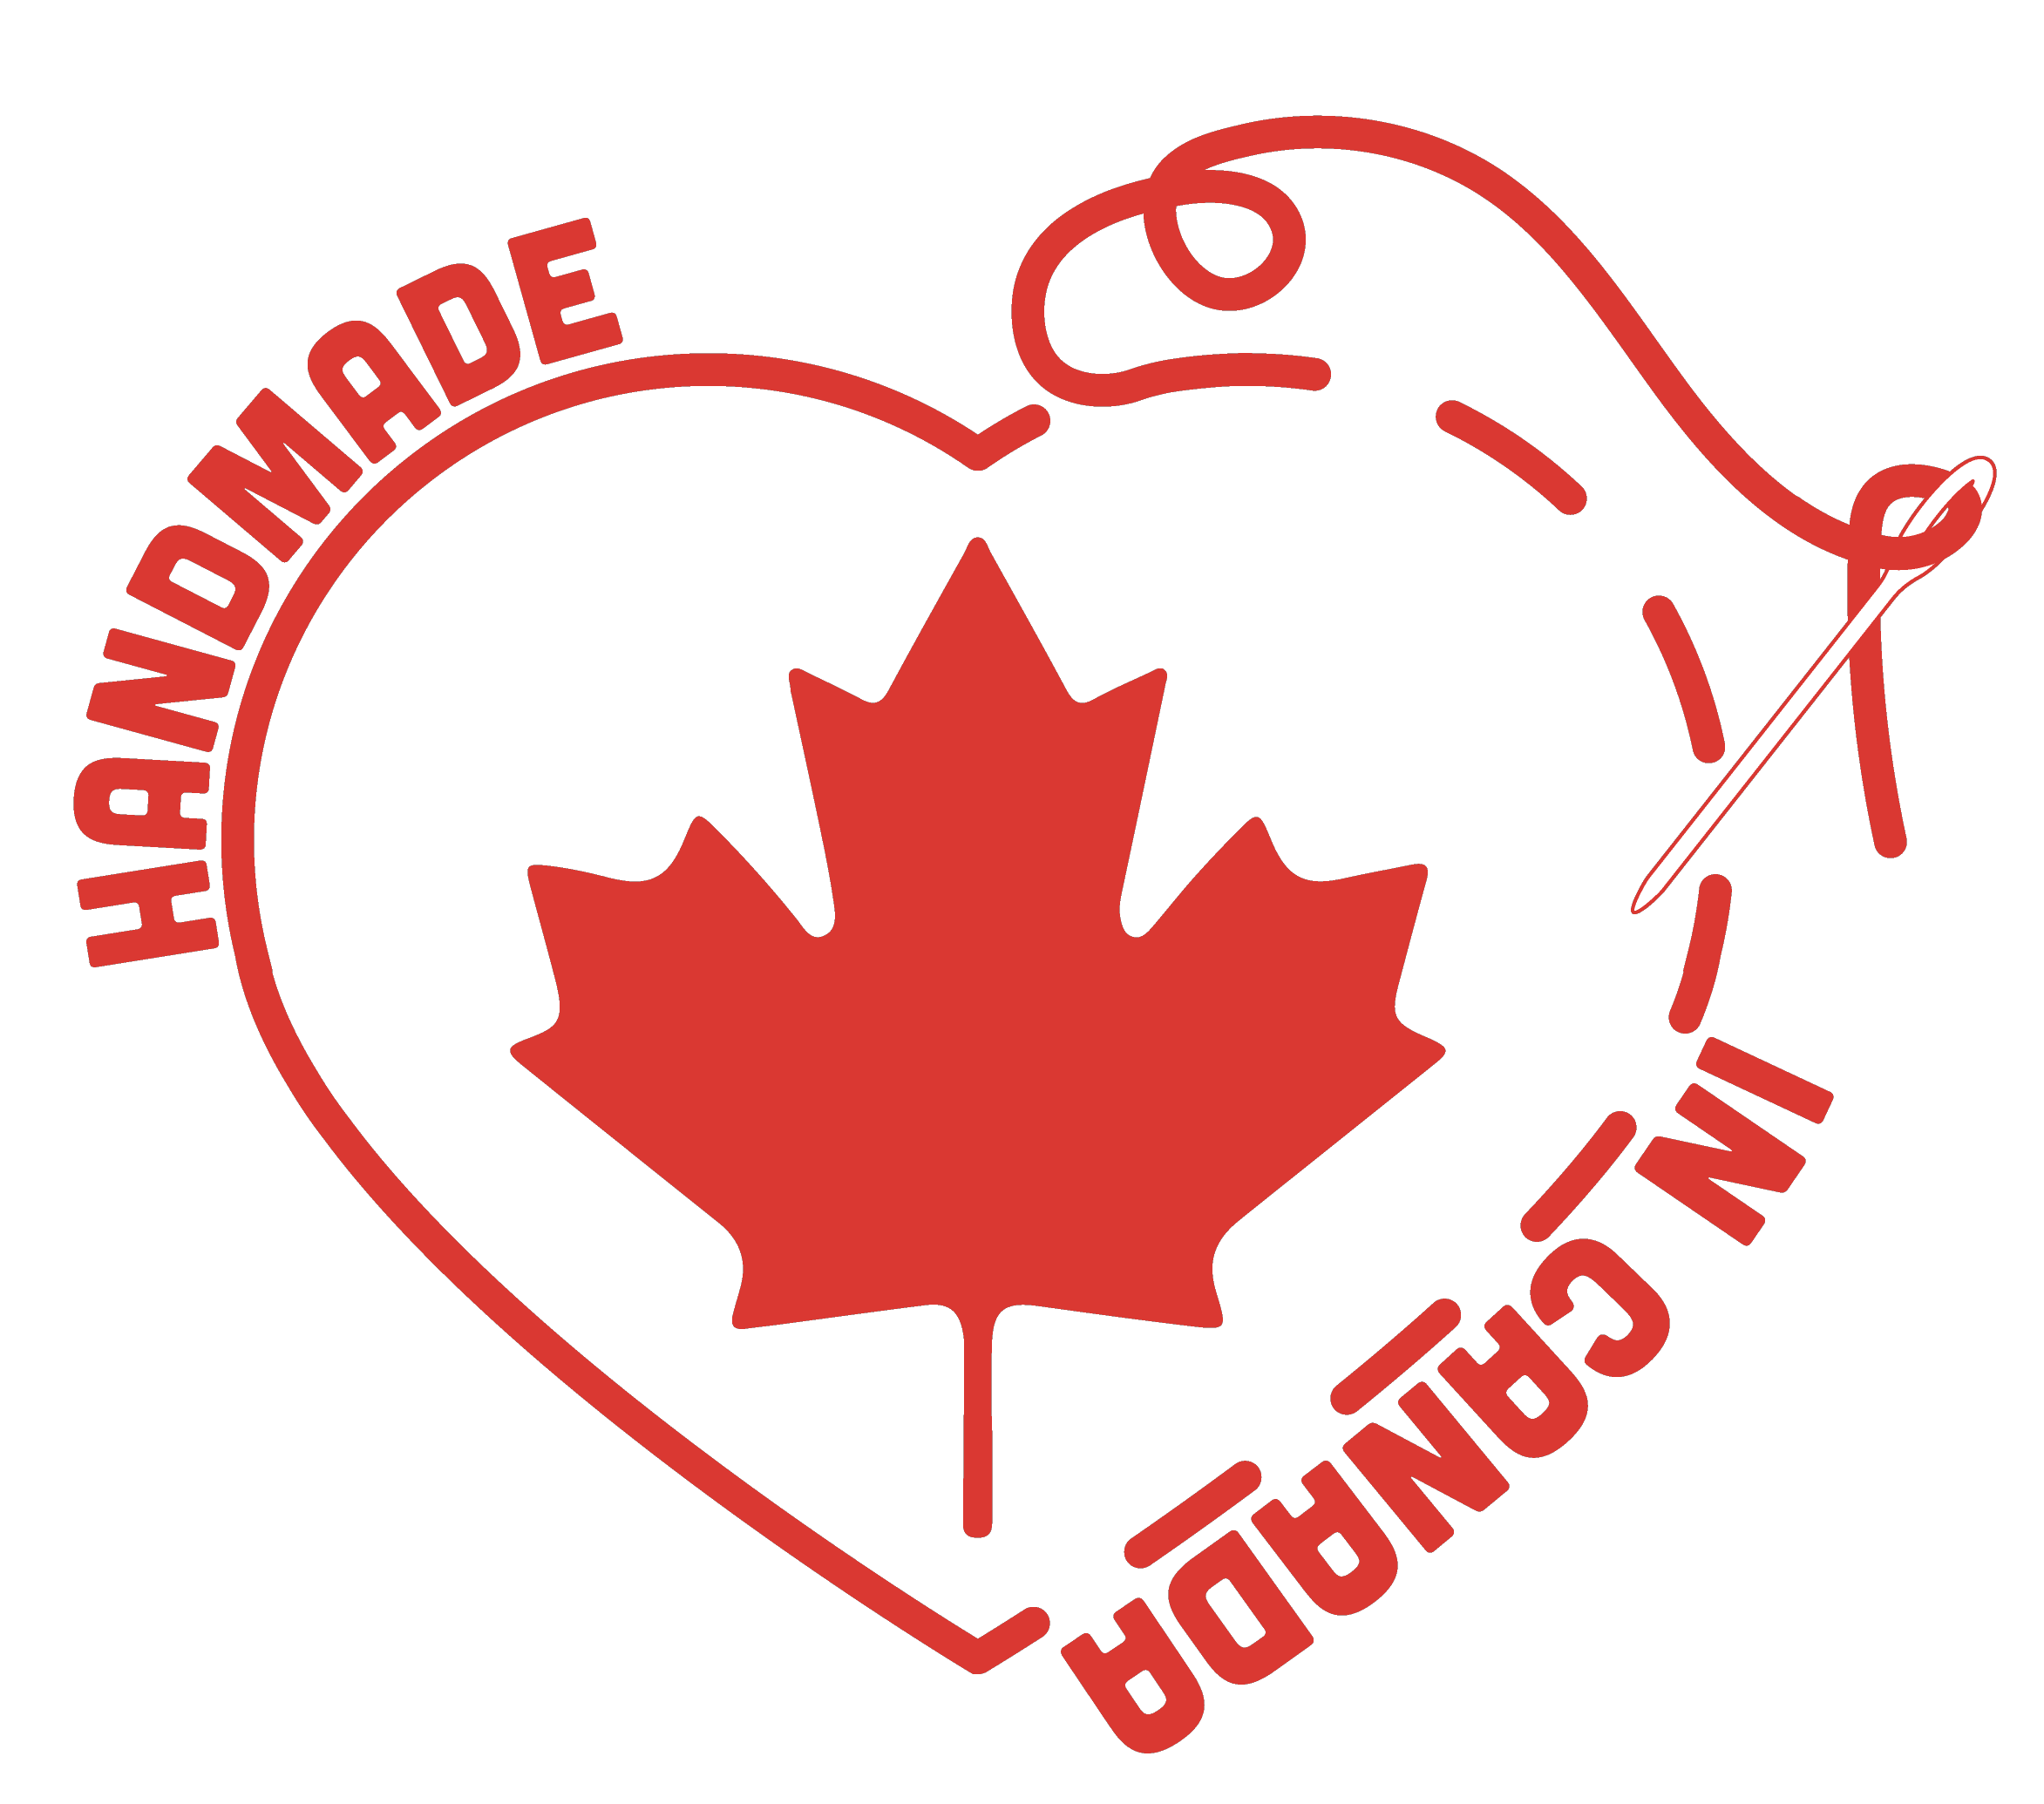 https://cdn11.bigcommerce.com/s-1alqgheign/images/stencil/original/image-manager/handmade-in-canada-smaller.png?t=1691084386